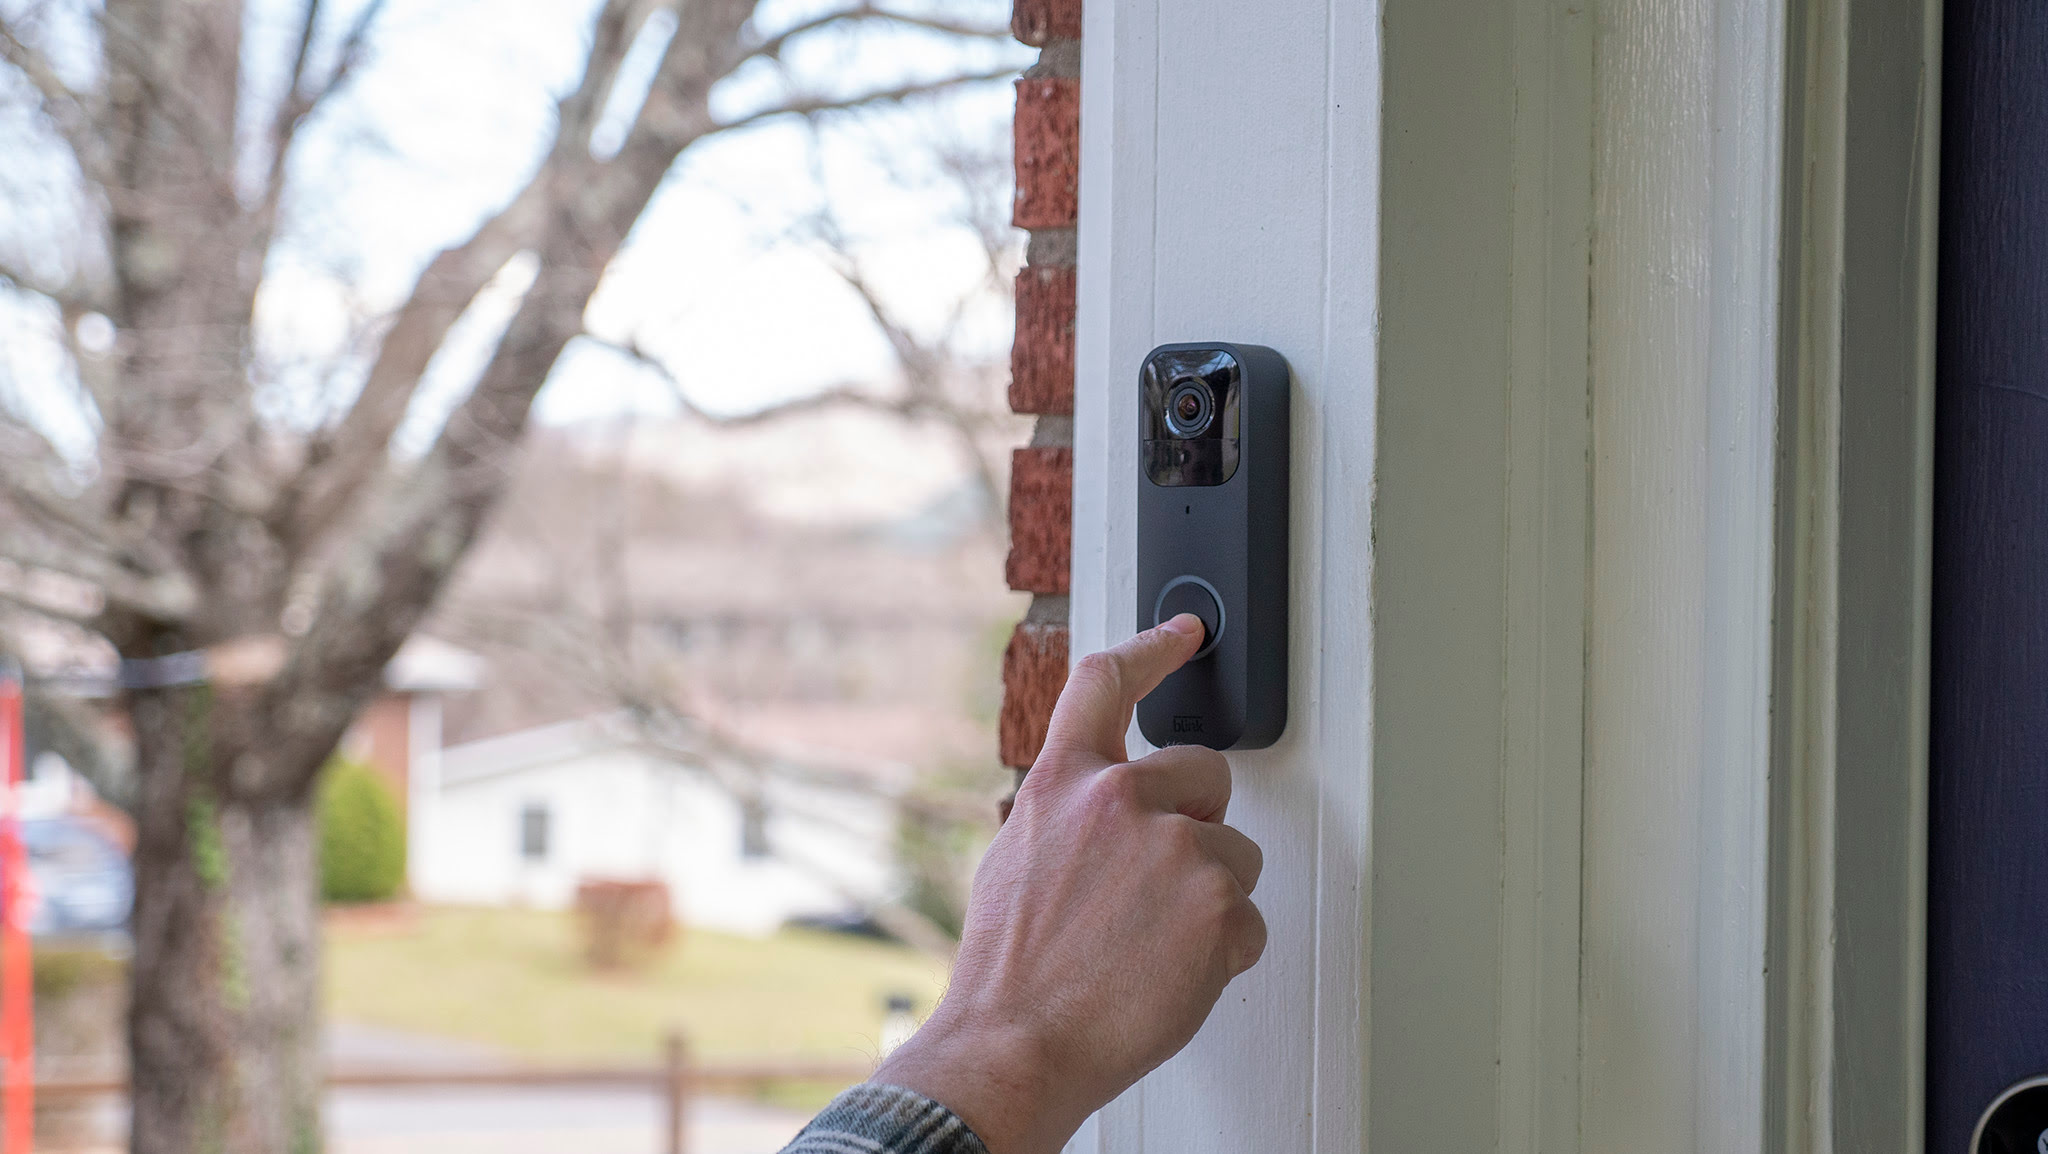 How To Install Blink Doorbell Without Screws